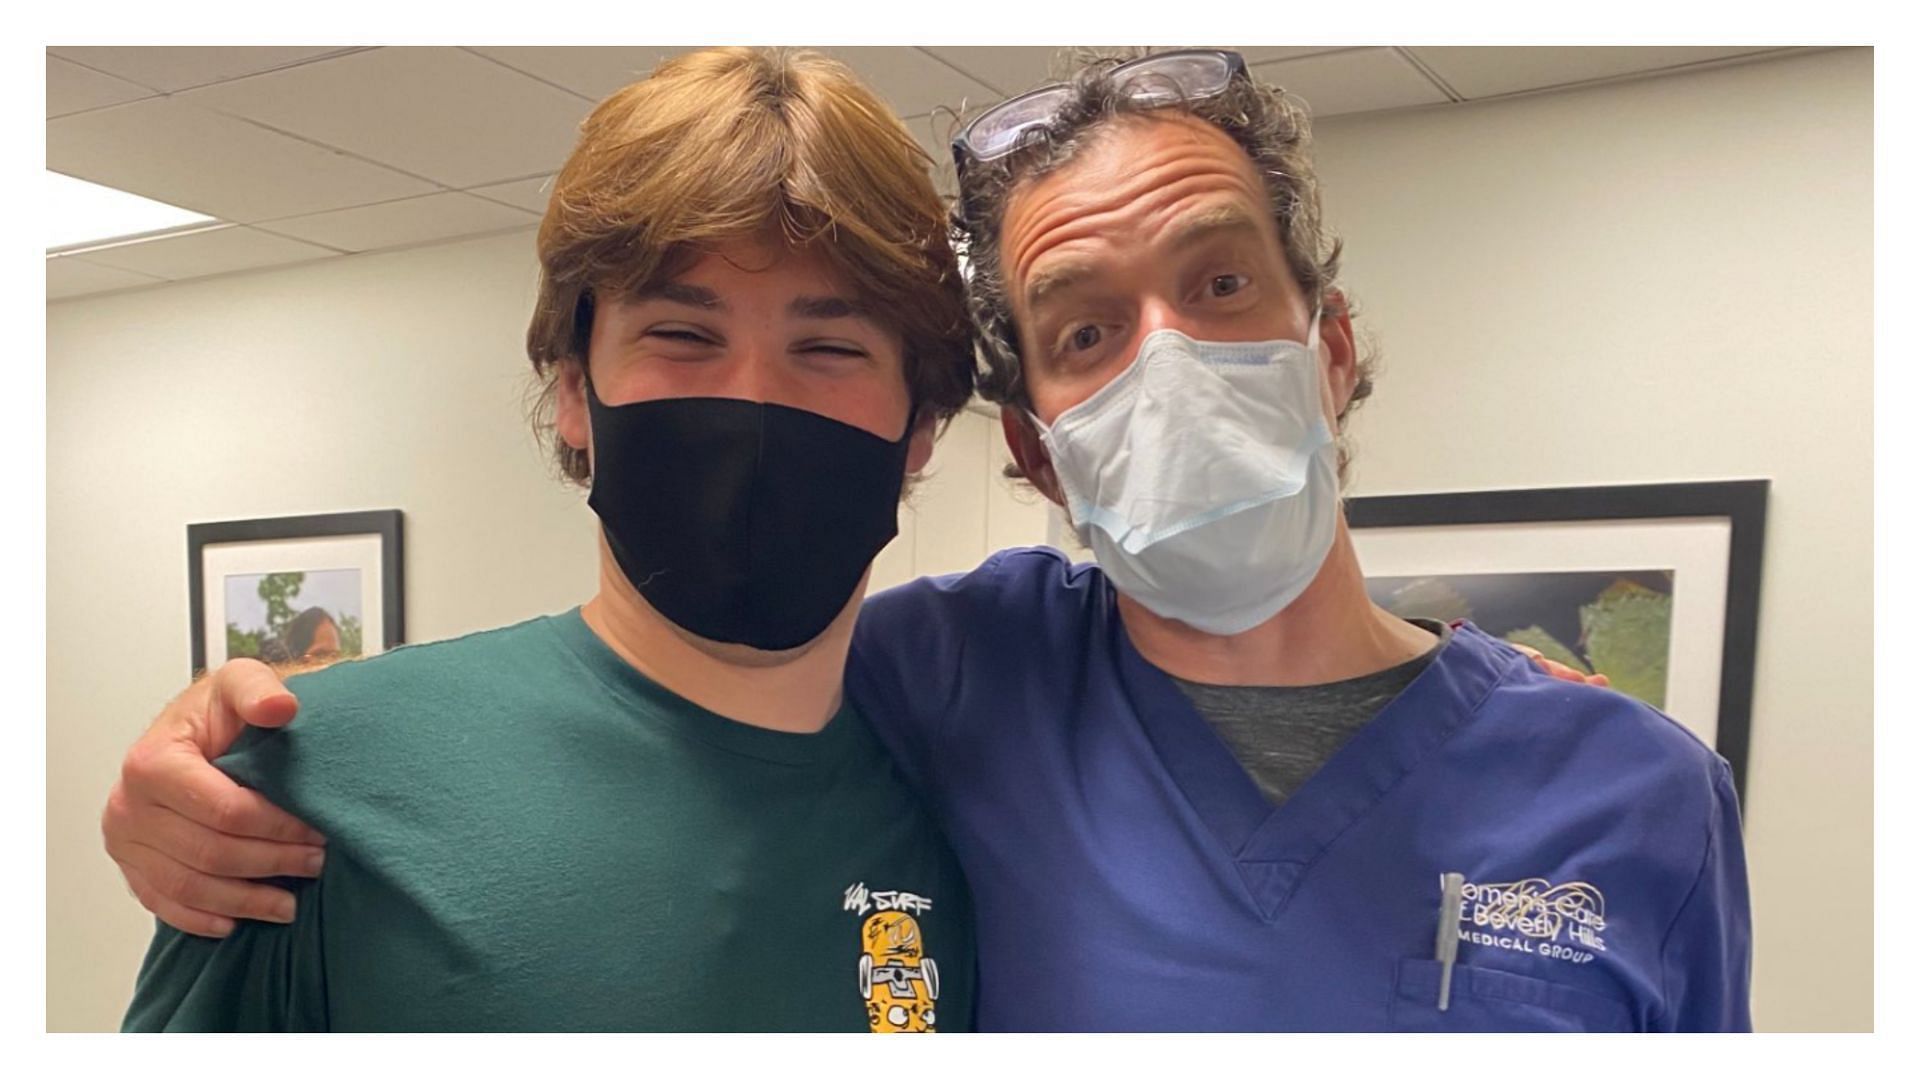 Dr. Jay Goldberg with one of his patients (Image via officialellenk/Twitter)